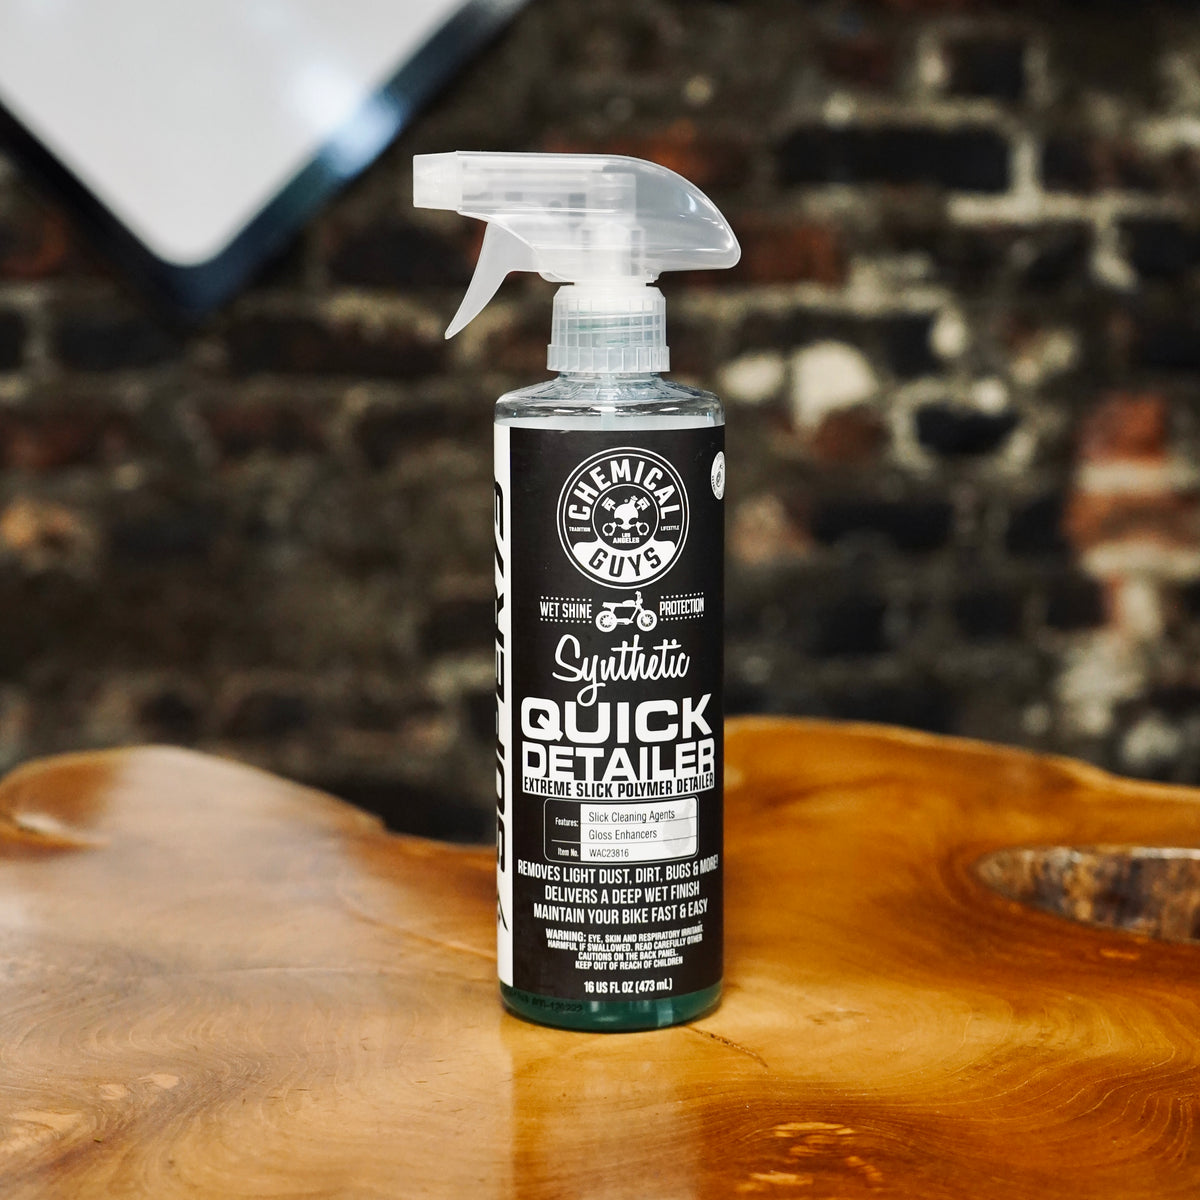 Synthetic Quick Detailer - Super73 X Chemical Guys